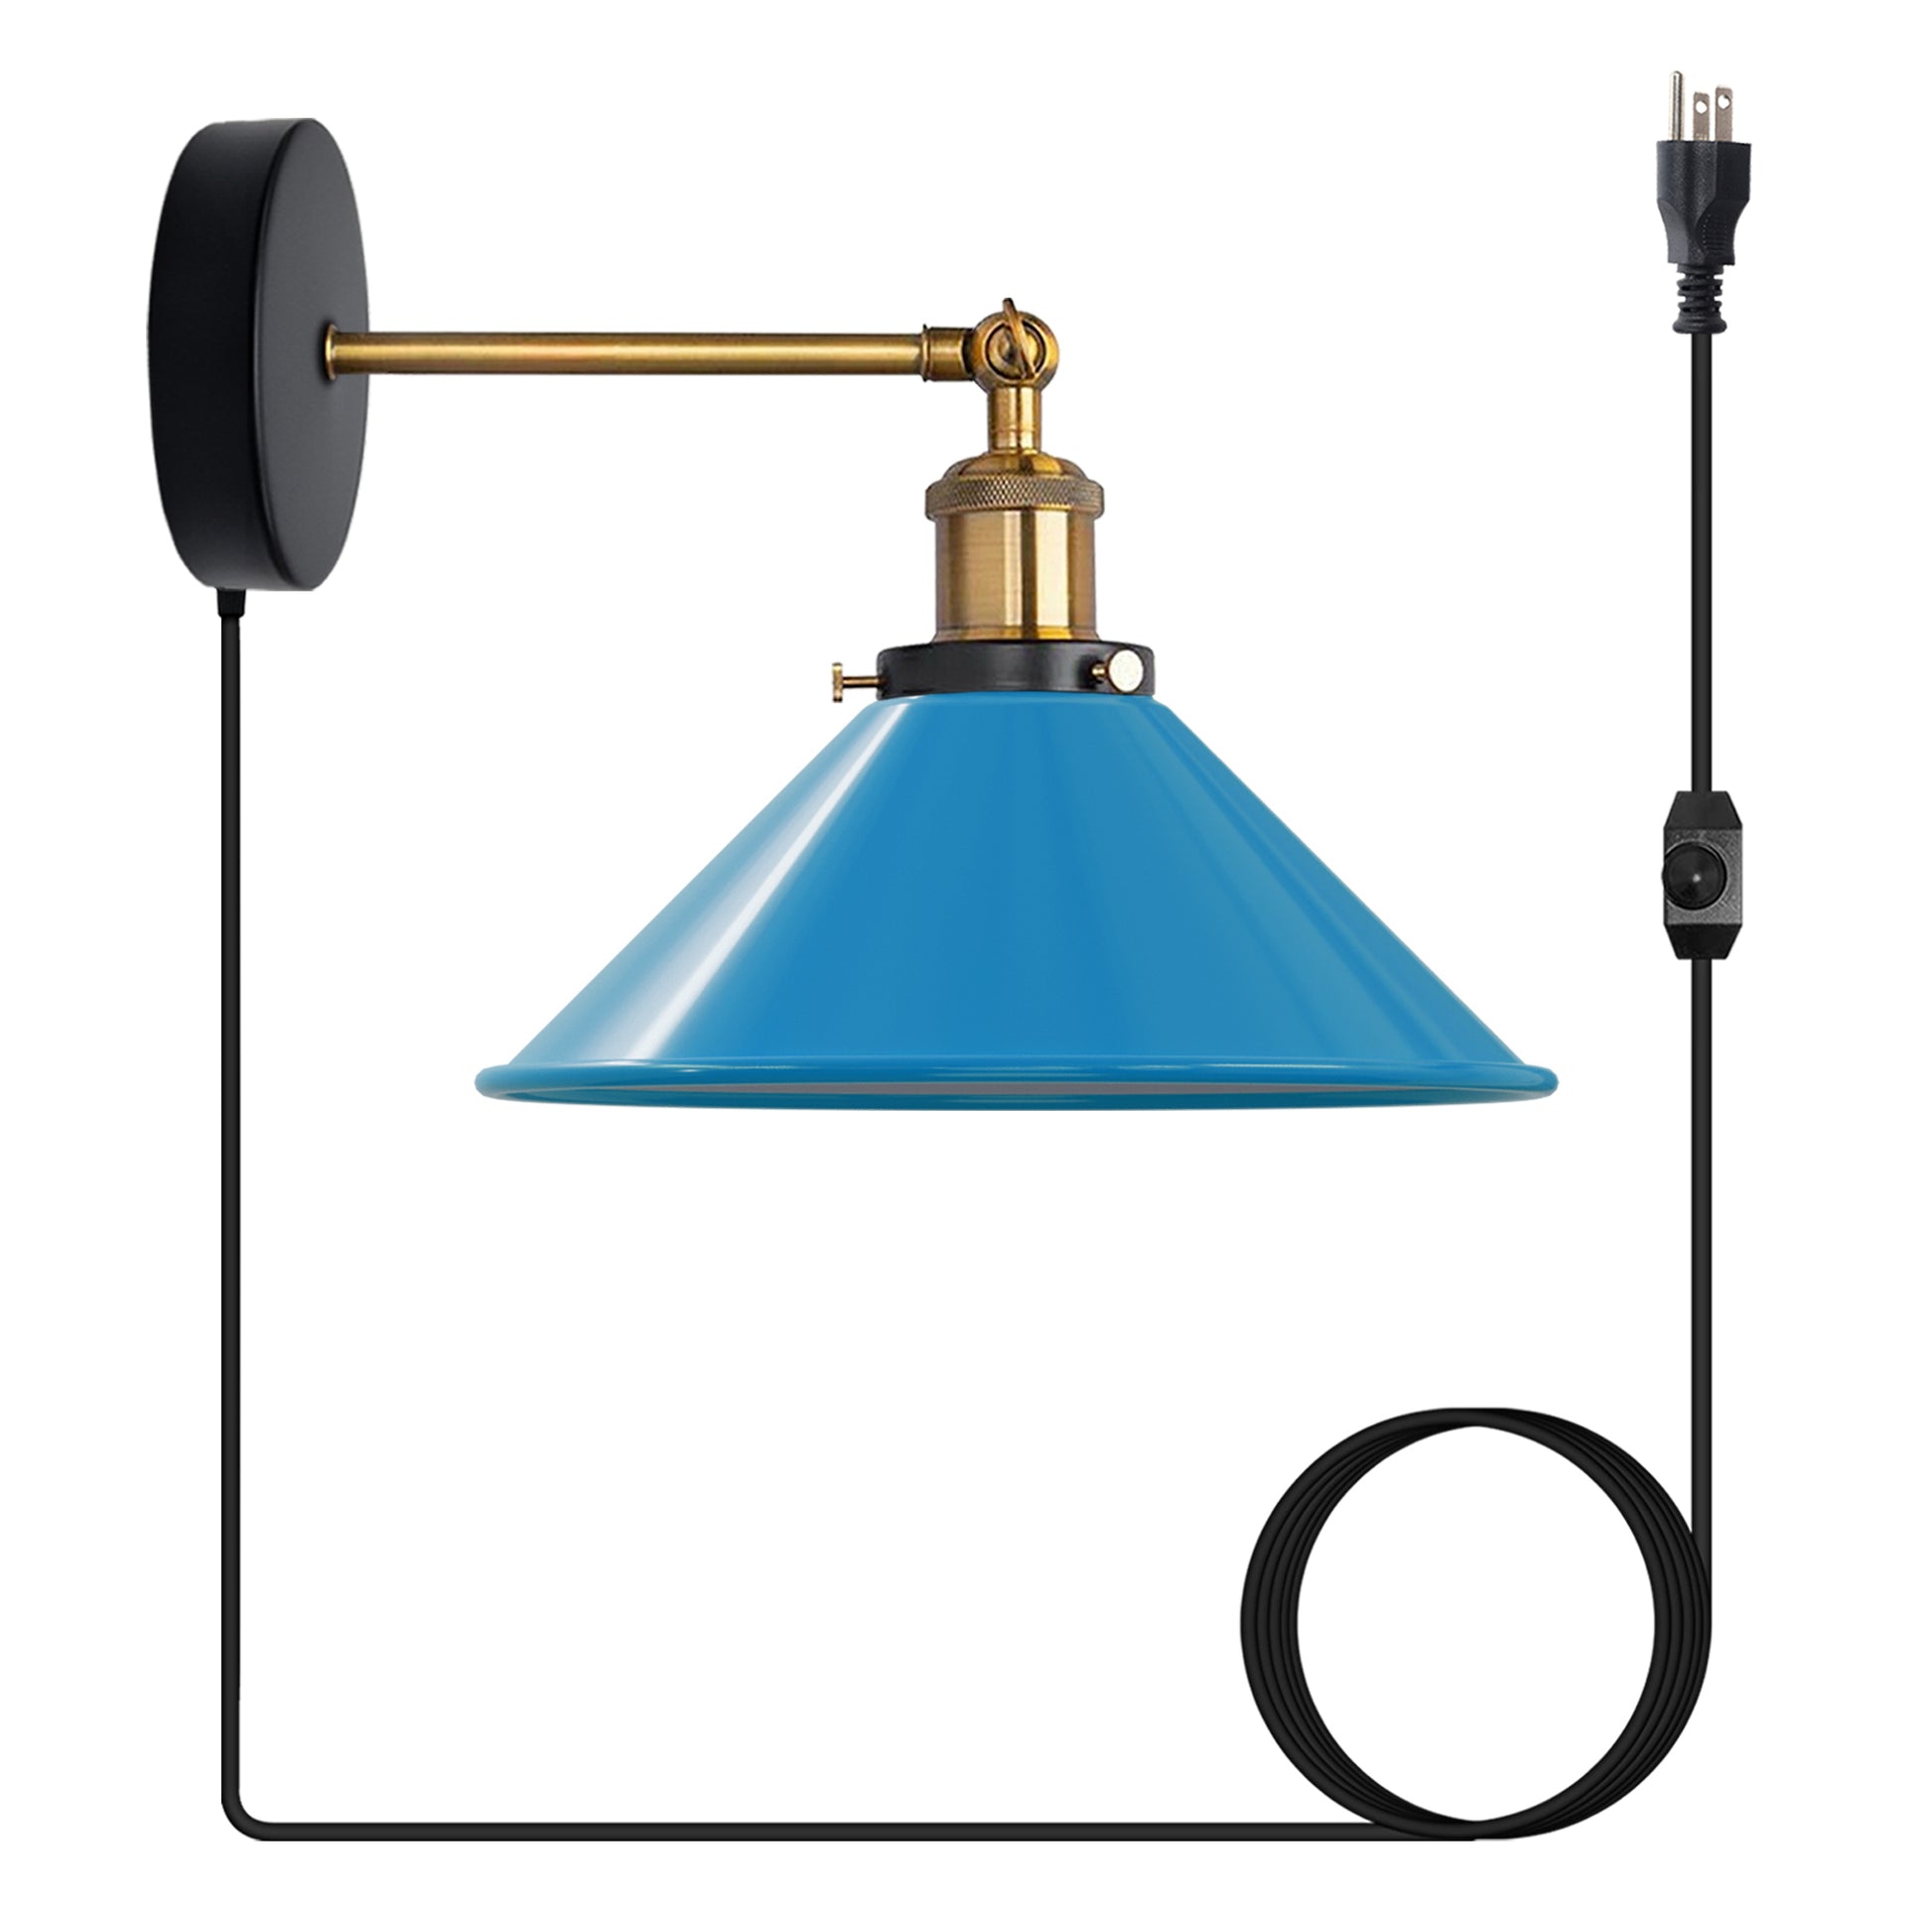 Blue Plug-in Wall Light Sconces with Dimmer Switch.JPG